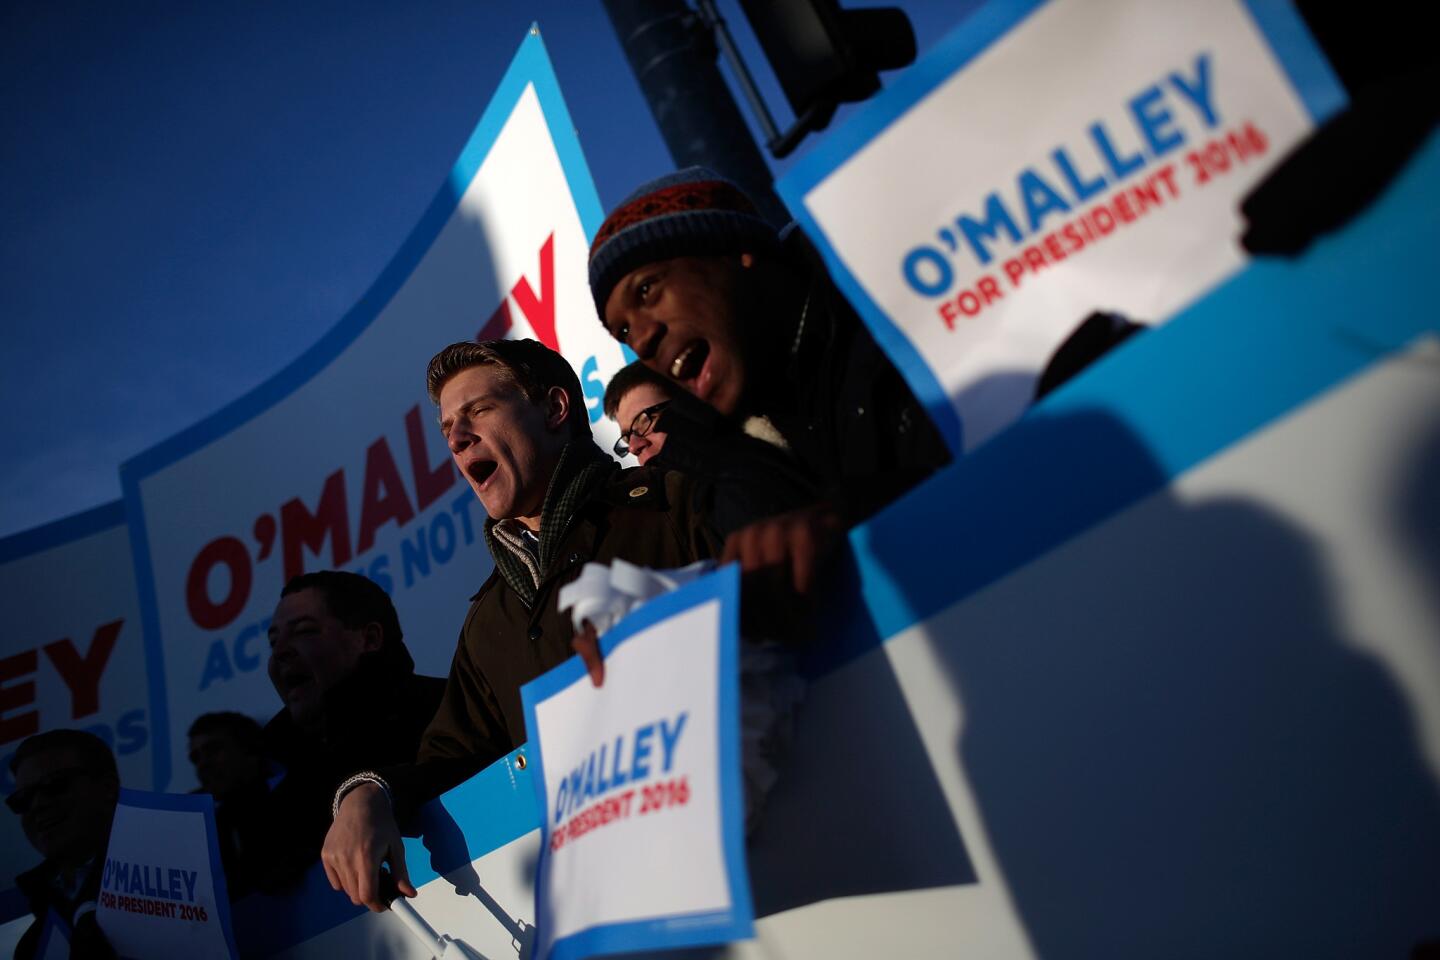 Martin O'Malley supporters